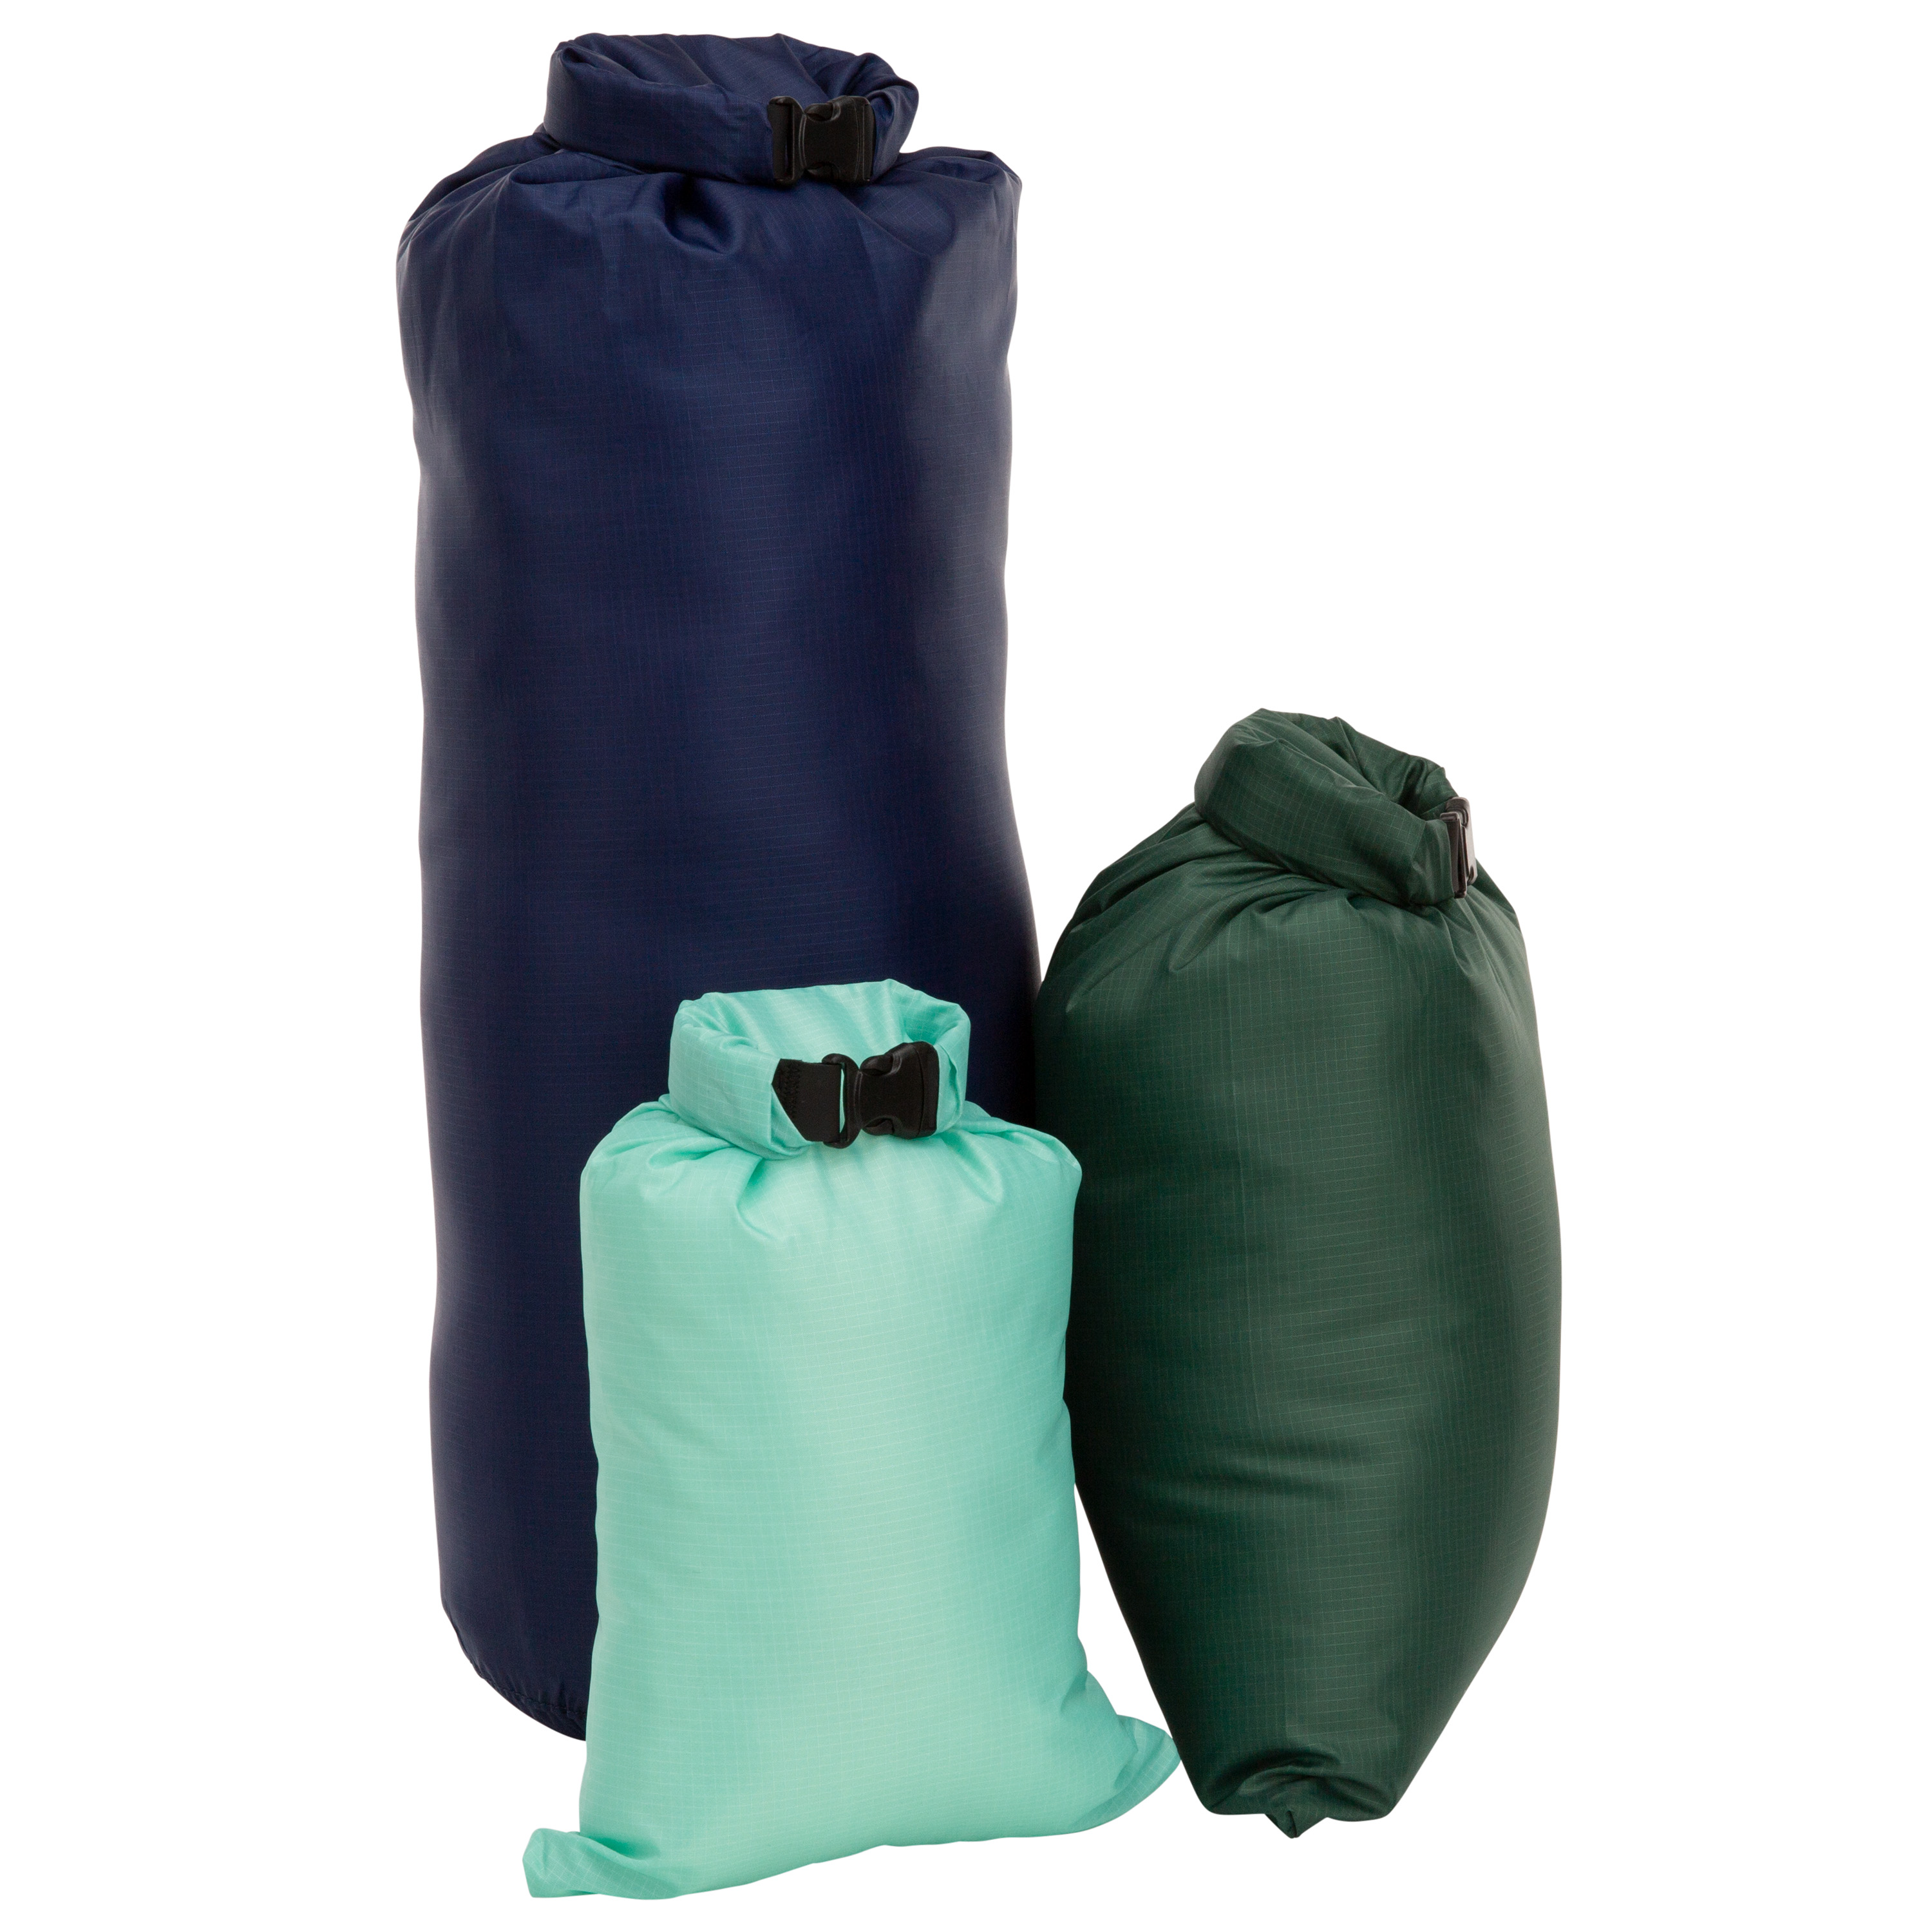 Outdoor Products Ultimate Dry Sacks, 3 Pack, Weather Resistant Dry Bag, Unisex, Green, Blue, 10.6 L - image 1 of 9